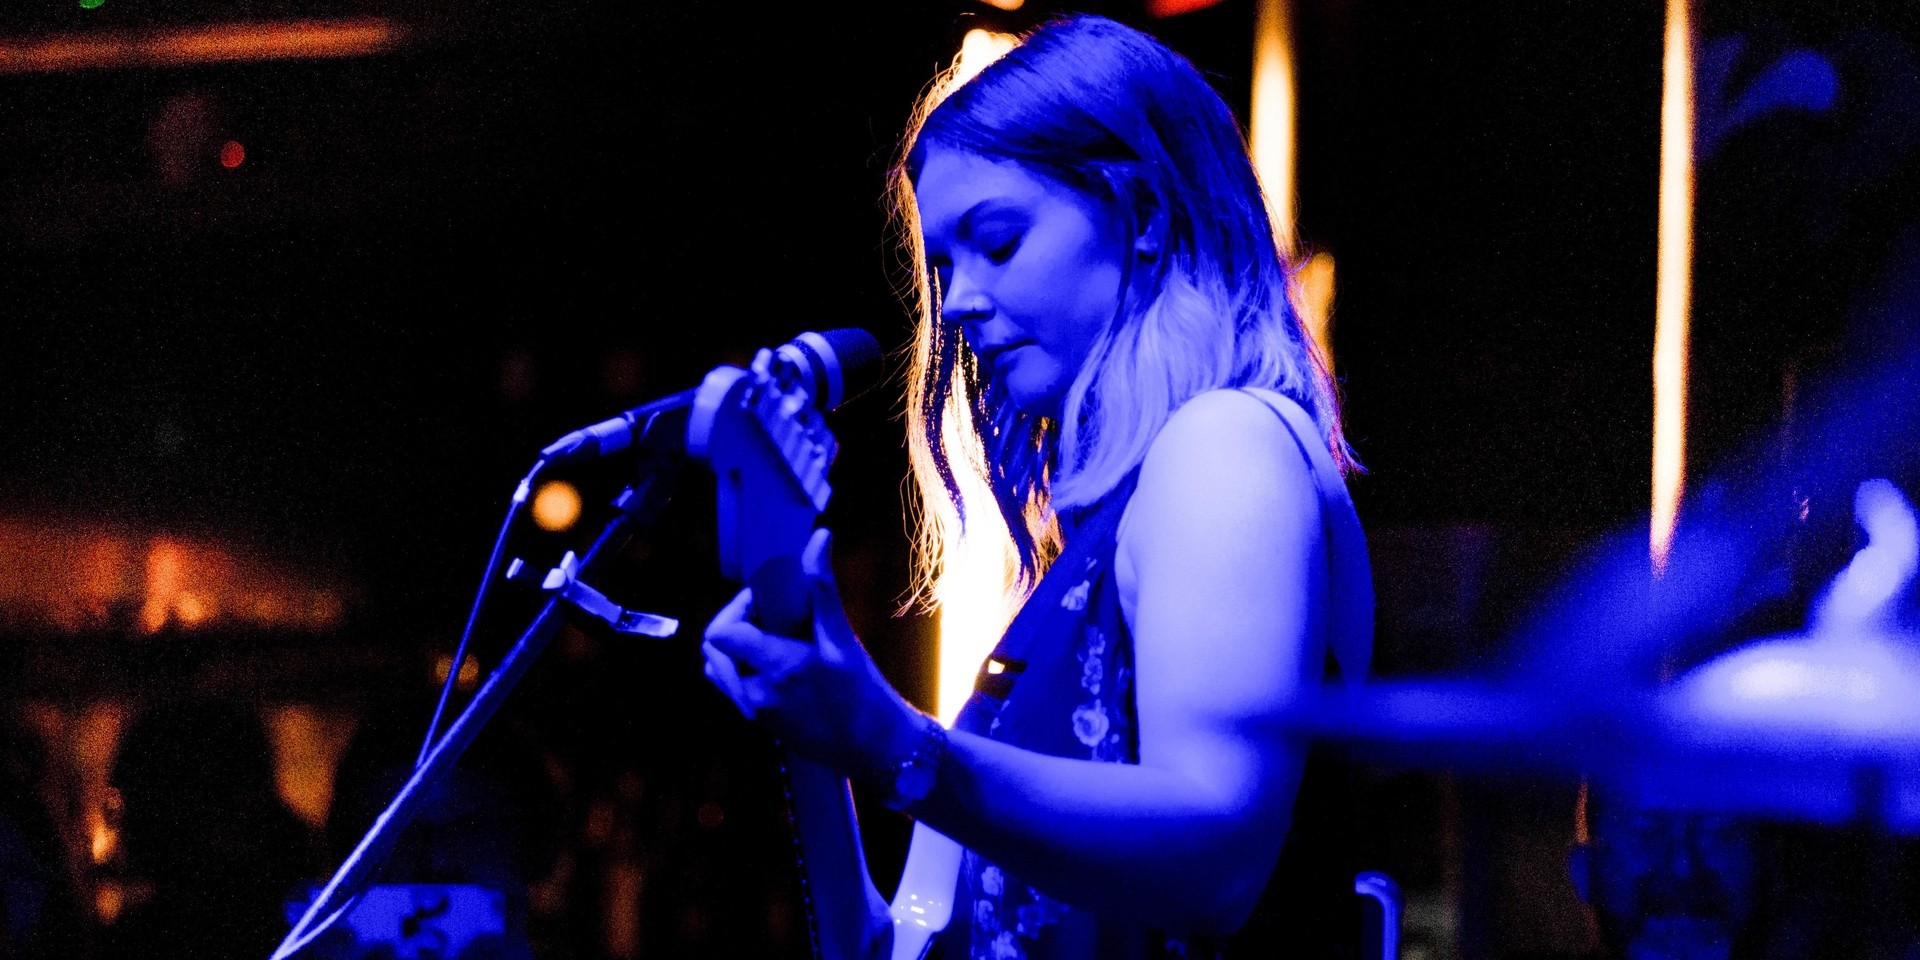 PHOTO GALLERY: Honeyblood puts on a raucous showing in their Singapore debut